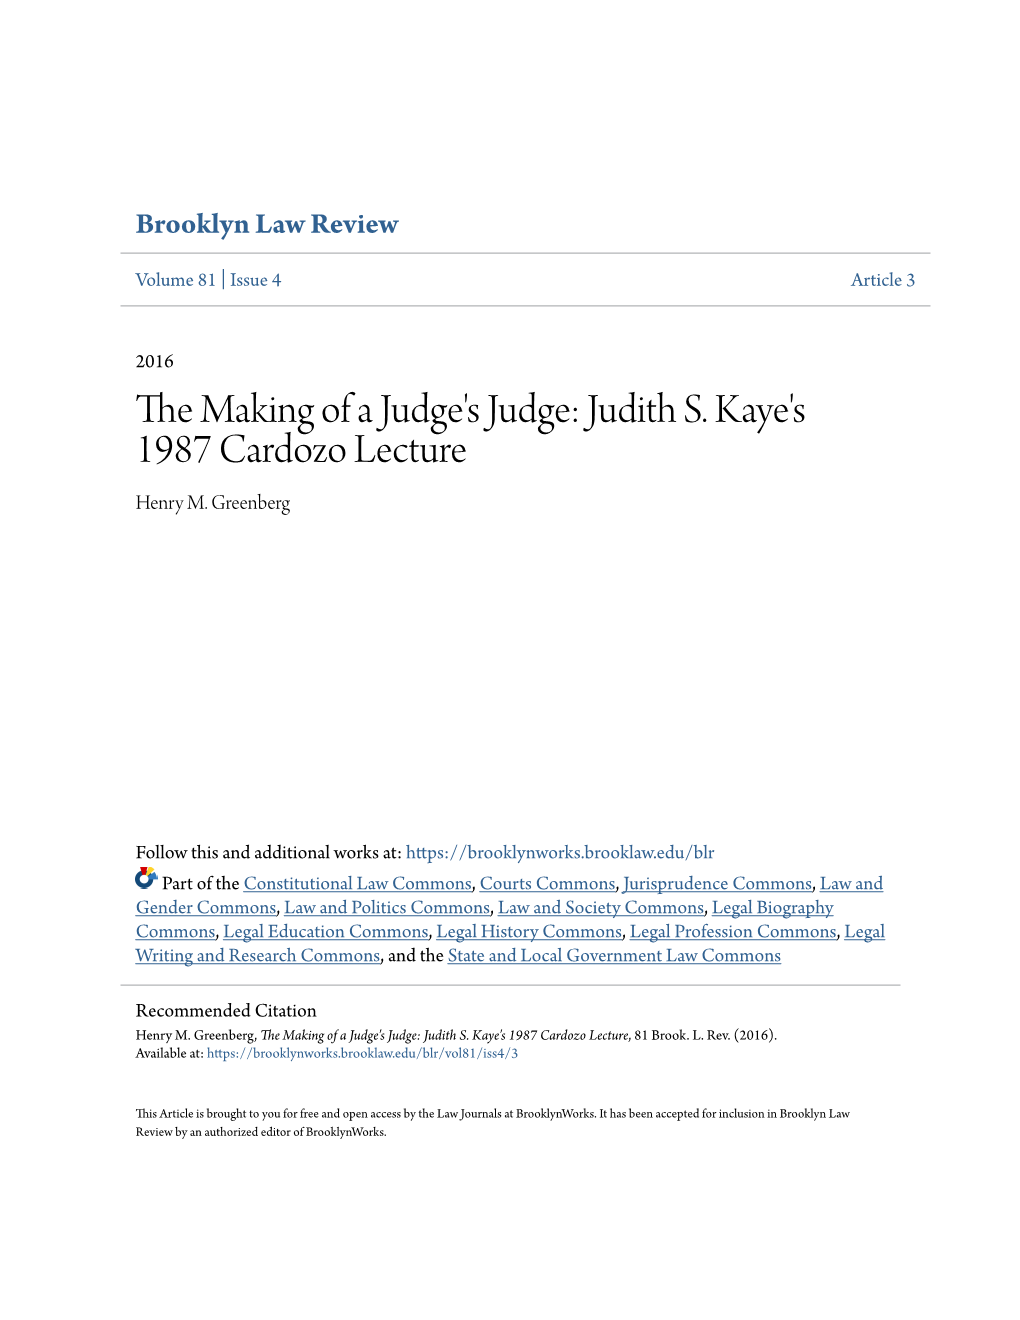 The Making of a Judge's Judge: Judith S. Kaye's 1987 Cardozo Lecture, 81 Brook